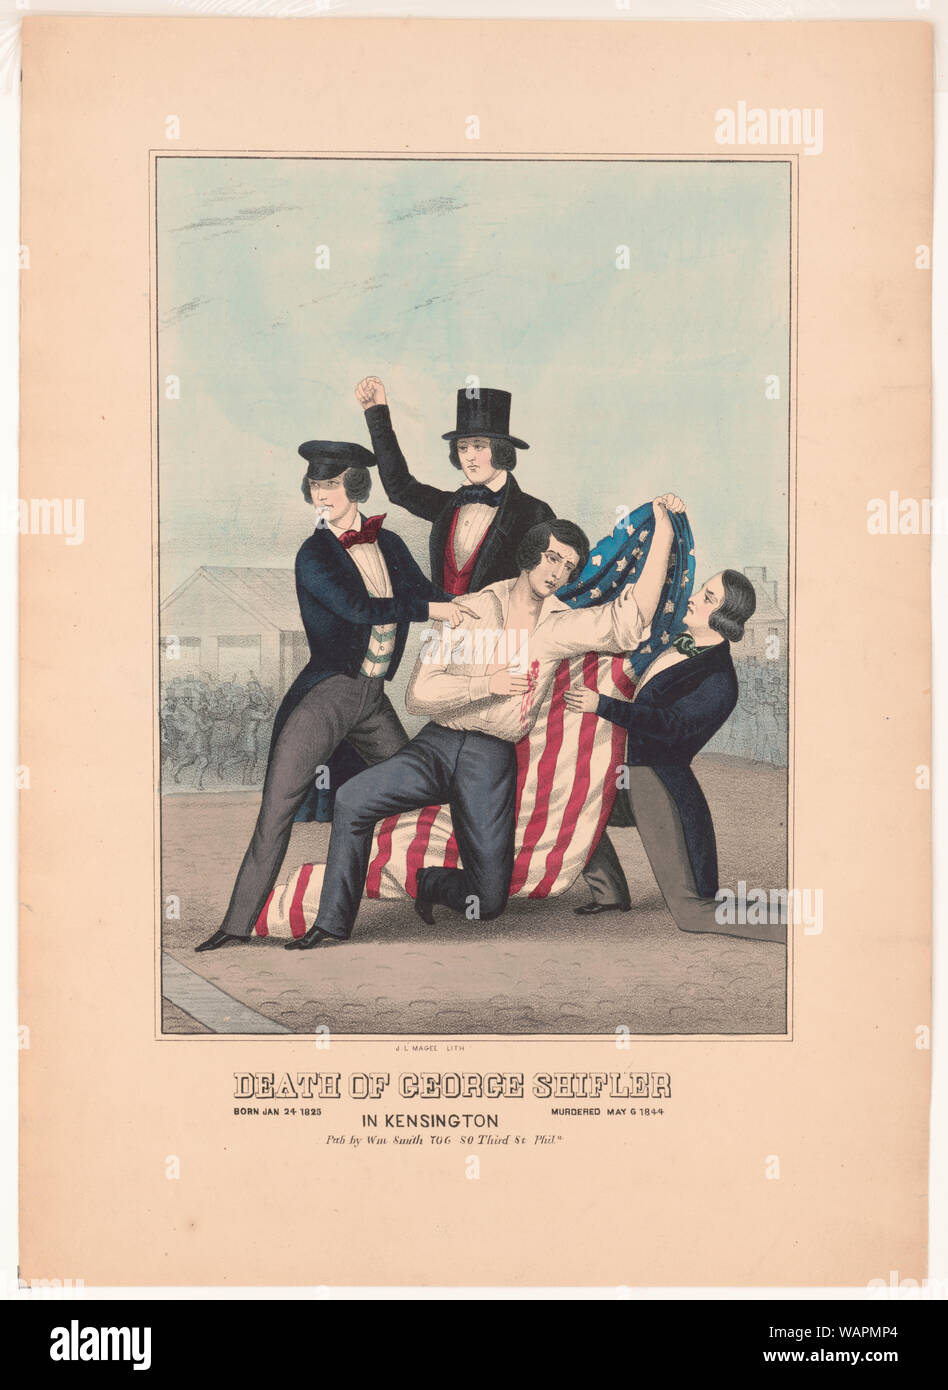 Death of George Shifler. Born Jan 24 1825 murdered May 6, 1844 in Kensington / J.L. Magee lith. Stock Photo